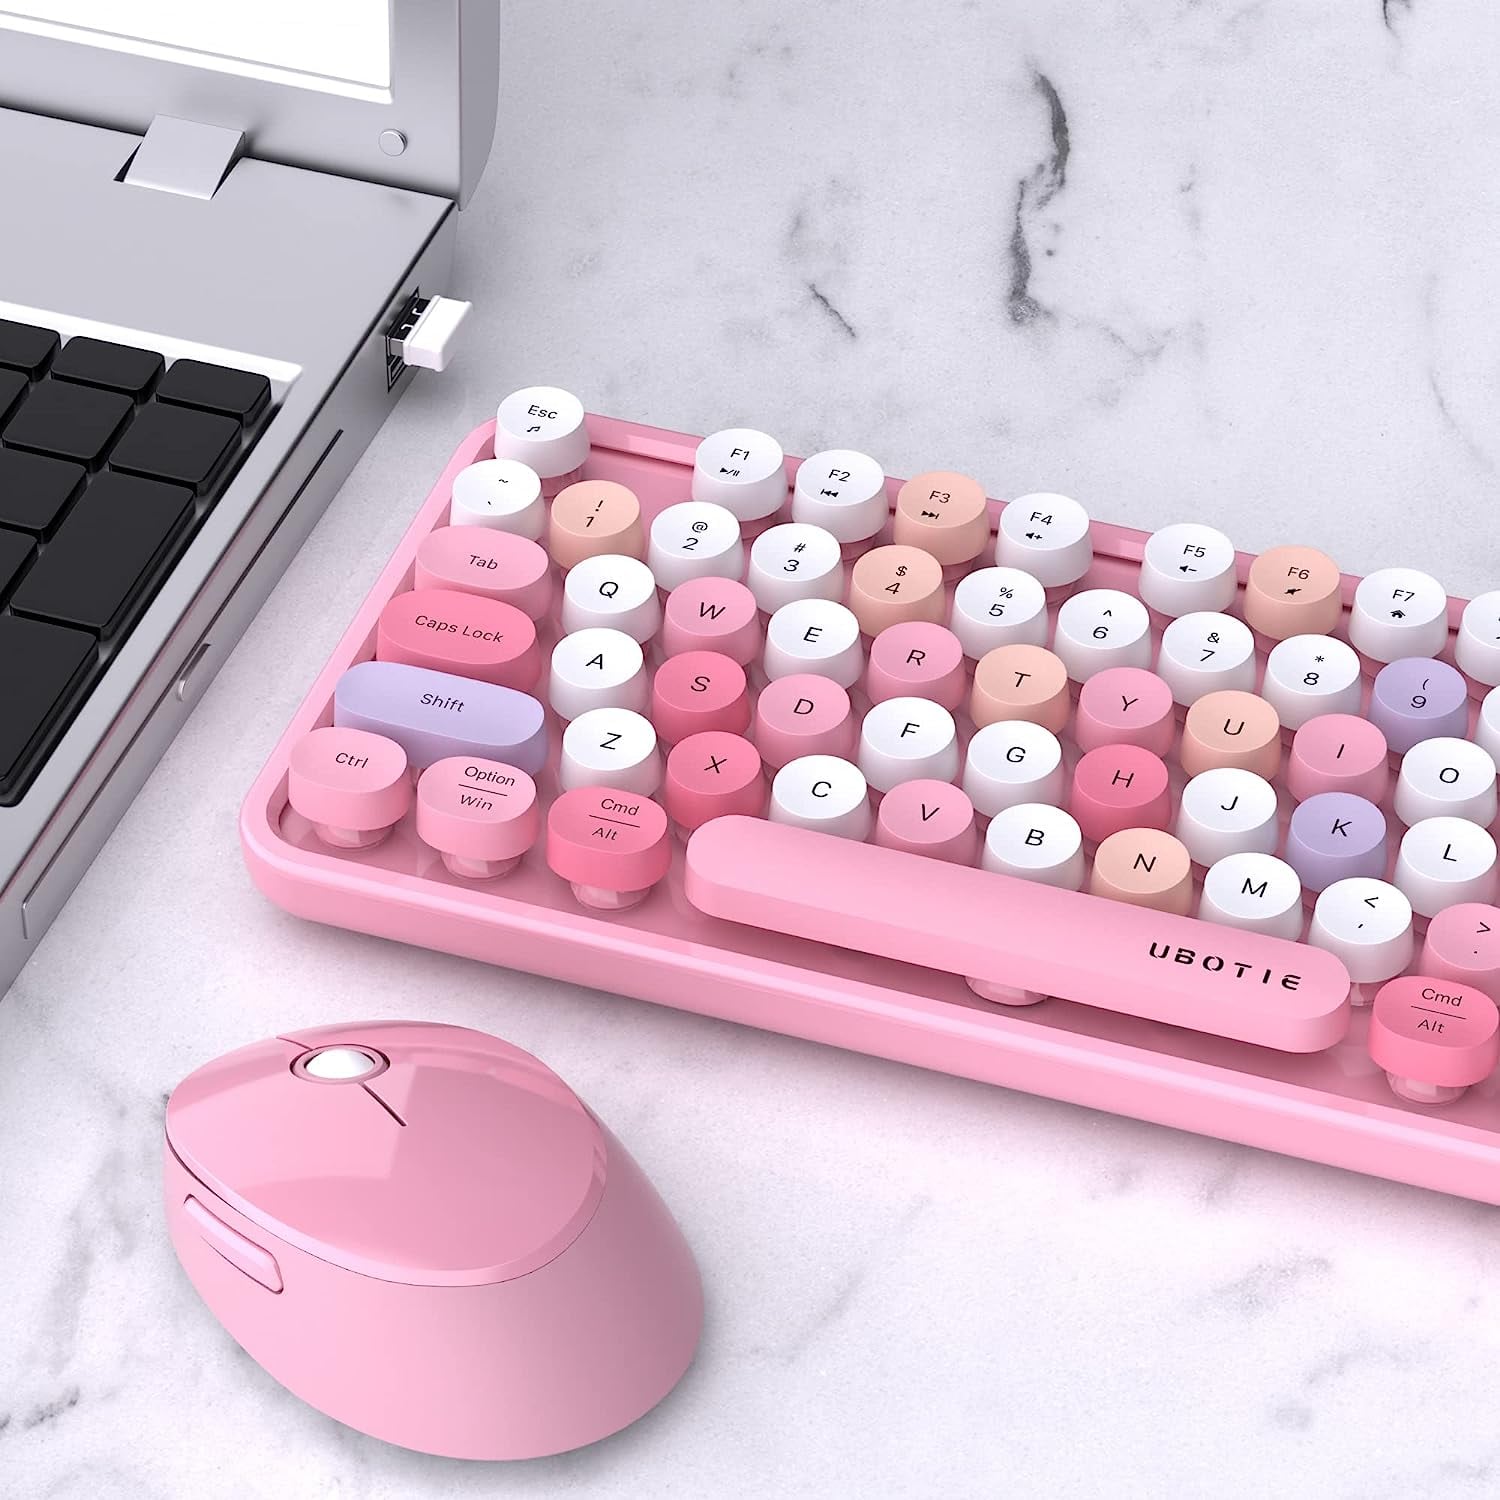 Our favourite typing games – The Keyboard Company